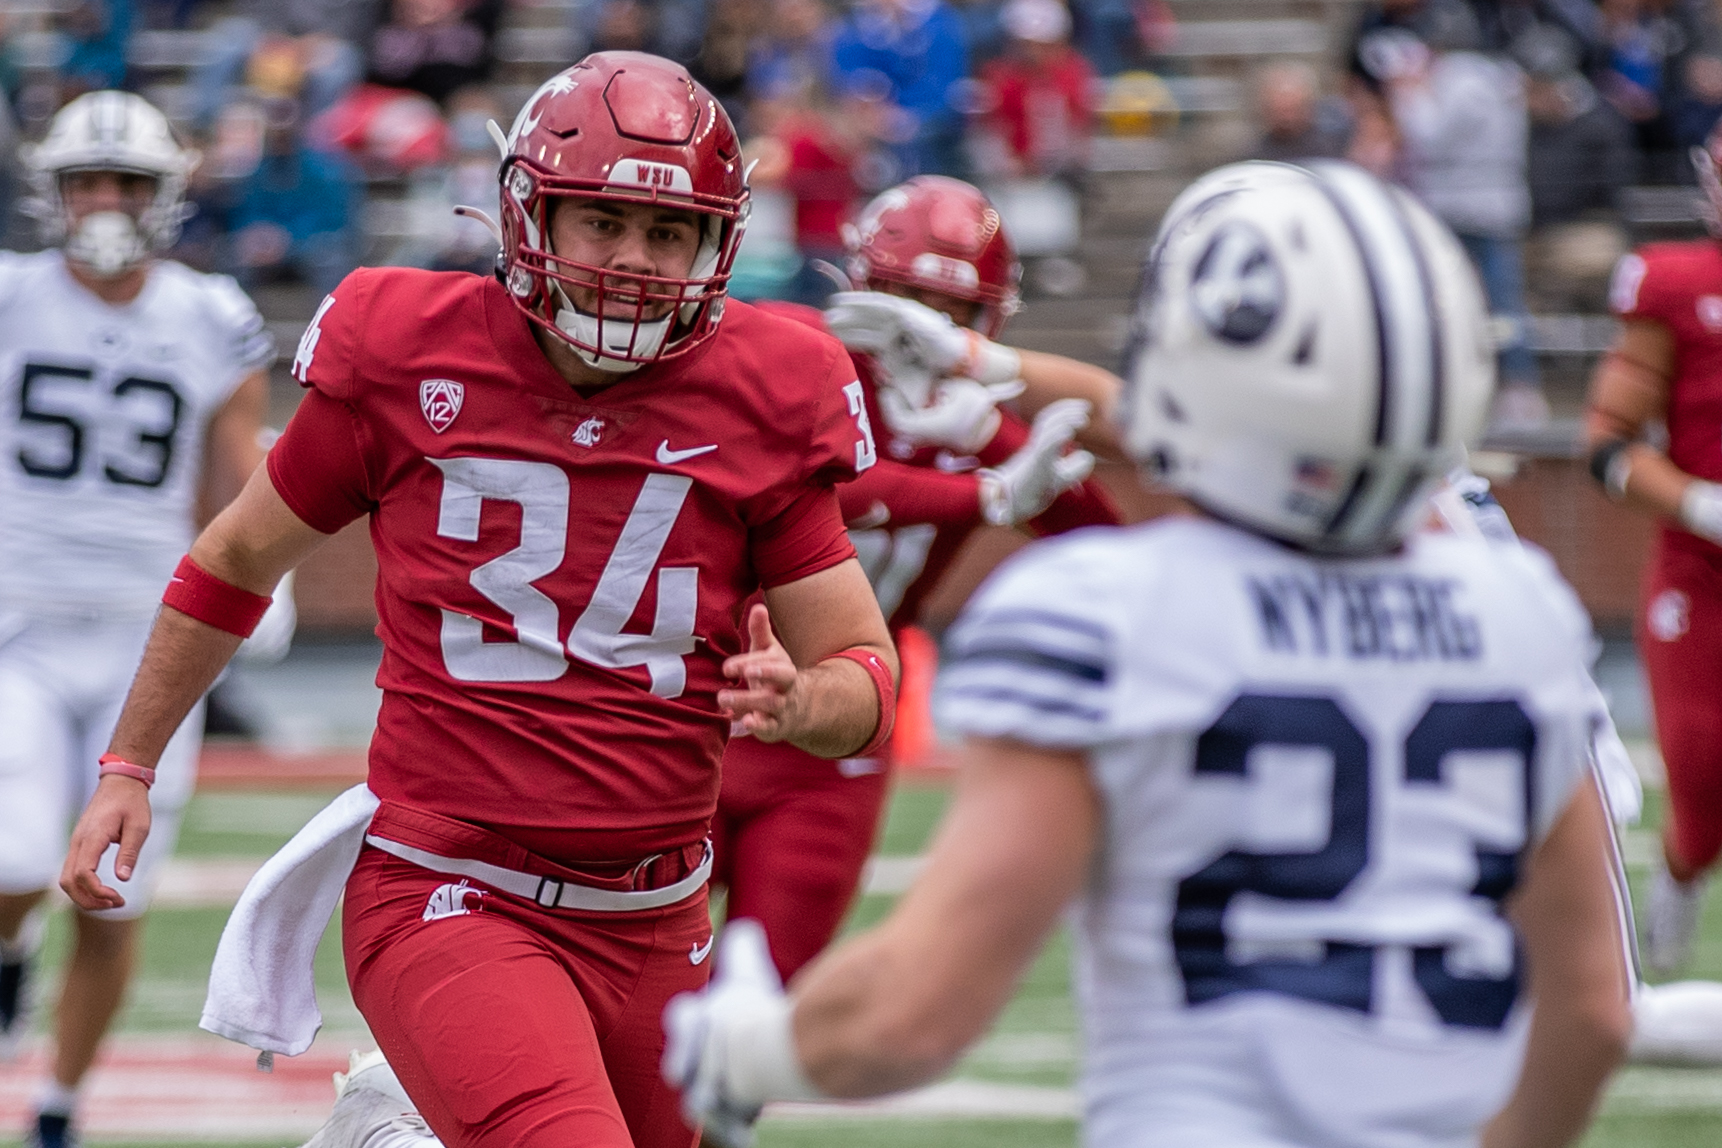 PULLMAN, WA - OCTOBER 23: Washington State long snapper Simon Samarzich (34) sprints downfield during a punt in the first half of a non-conference matchup between the BYU Cougars and the Washington State Cougars on October 23, 2021, at Martin Stadium in Pullman, WA.